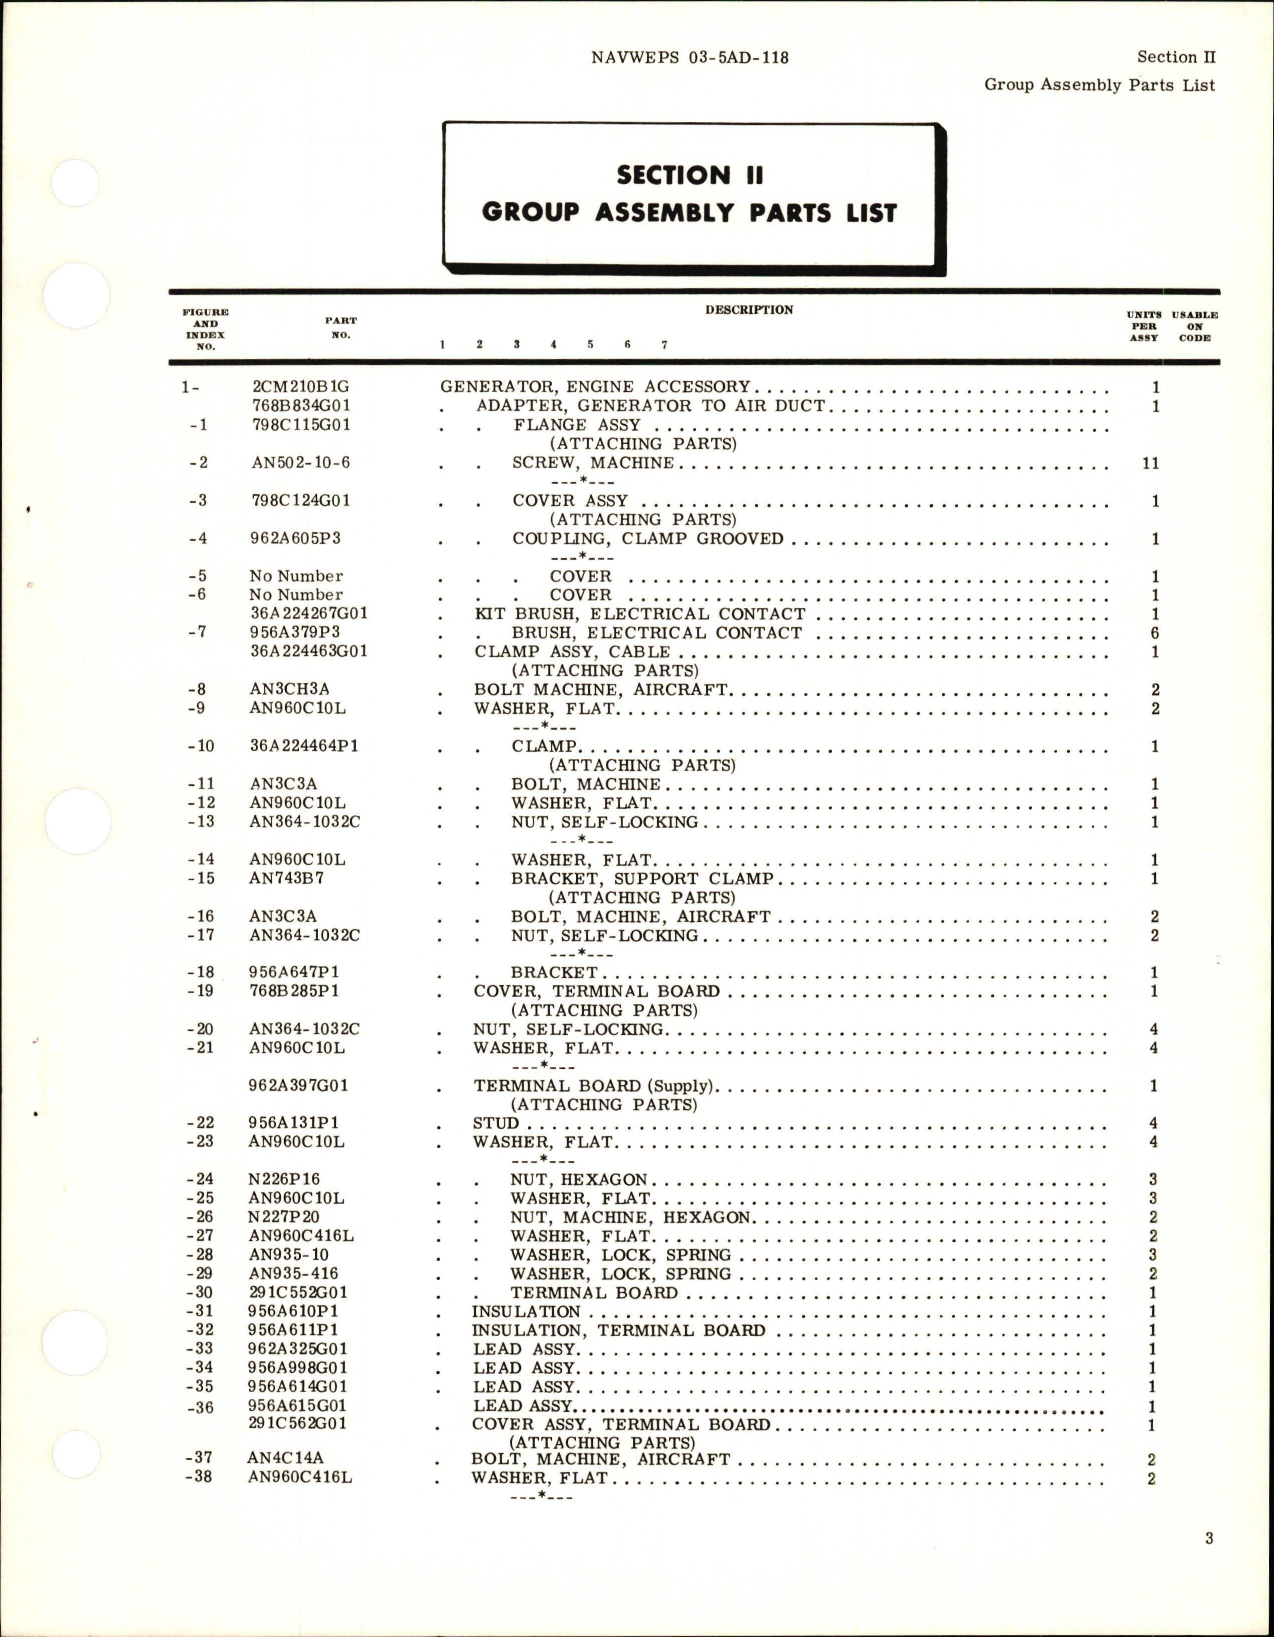 Sample page 5 from AirCorps Library document: Illustrated Parts Breakdown for Engine Accessory Generator - Model 2CM210BIG